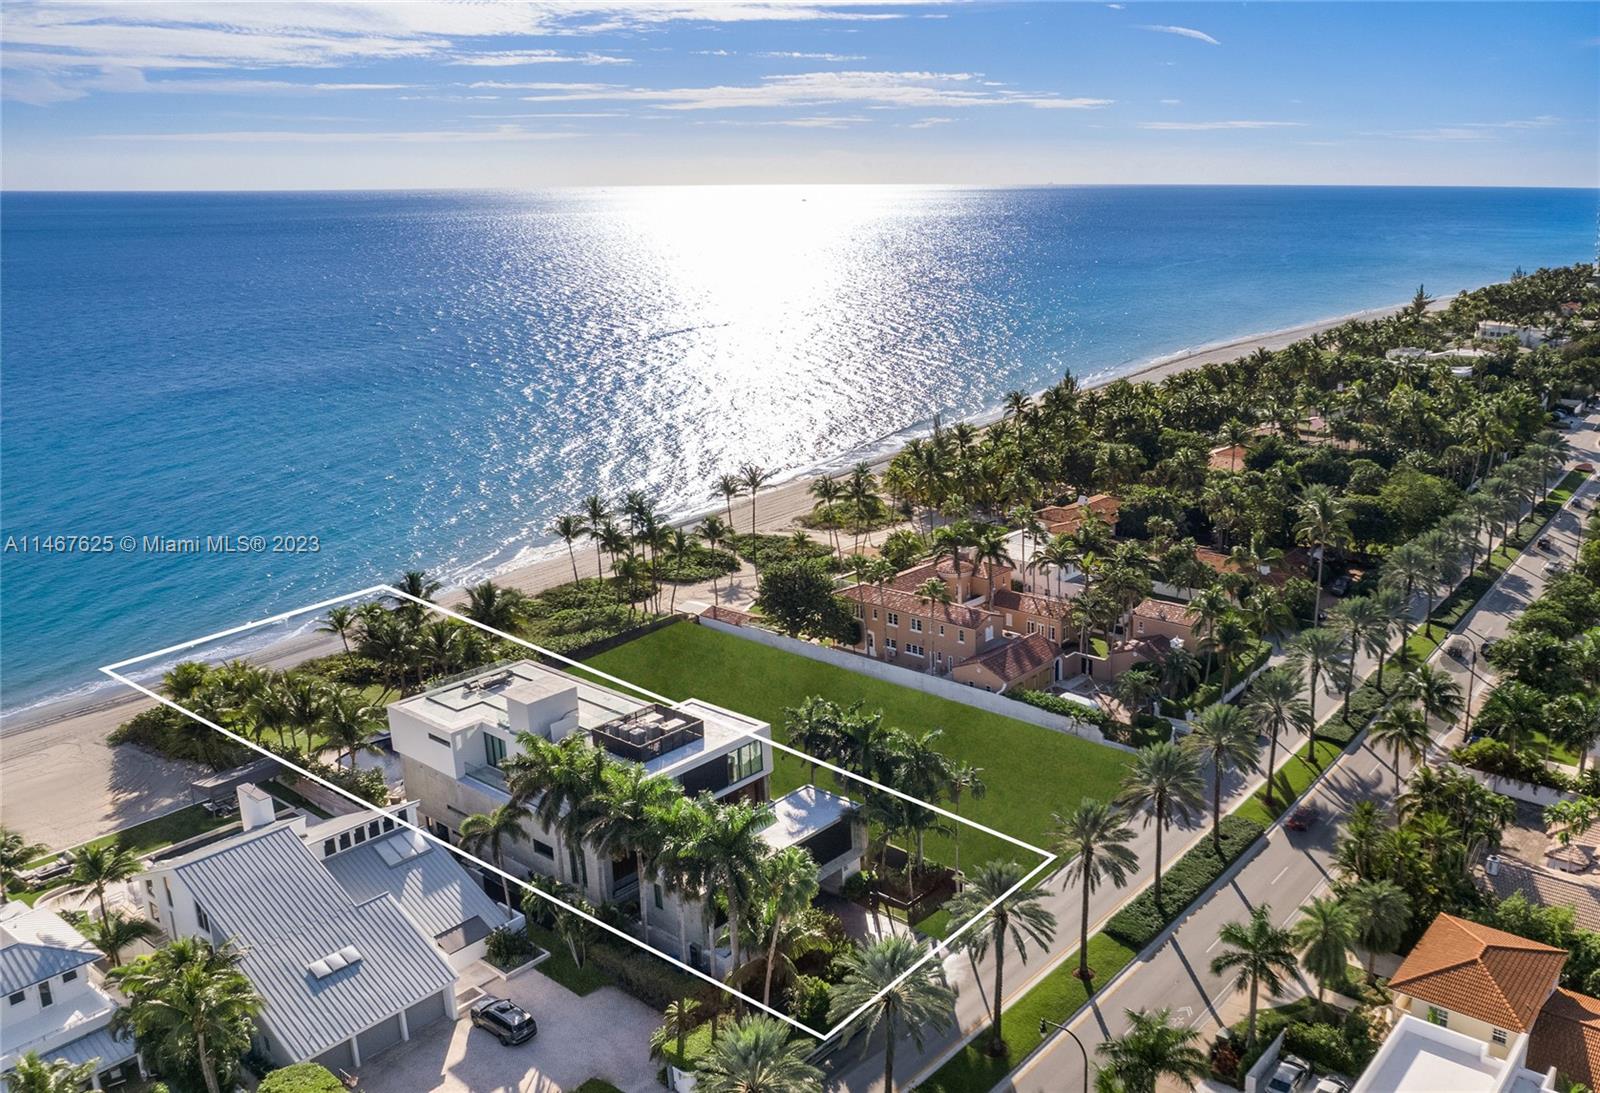 Spectacular oceanfront mansion in exclusive Golden Beach, situated directly on the Atlantic Ocean! This luxurious, 3-story, 12,000-SF home is sprawled on a 20,925-SF lot with 75-FT of pristine beach as your backyard! Here, ocean views can be enjoyed from everywhere, including the huge rooftop on the 4th level! Lavish living areas with wet bar, gourmet kitchen, elegant dining room, and a deep terrace flawlessly interconnect creating ideal spaces for indoor/outdoor entertaining. The home has 9 beds and 13 baths, including a lavish master suite with a sitting area, hers/his marble baths, walk-in closets, and a private terrace. Ground level has a theater, recreation area, staff room. Amenities: elevator, 2 summer kitchens, detached guesthouse, and incredible backyard with a pool, spa cabana!